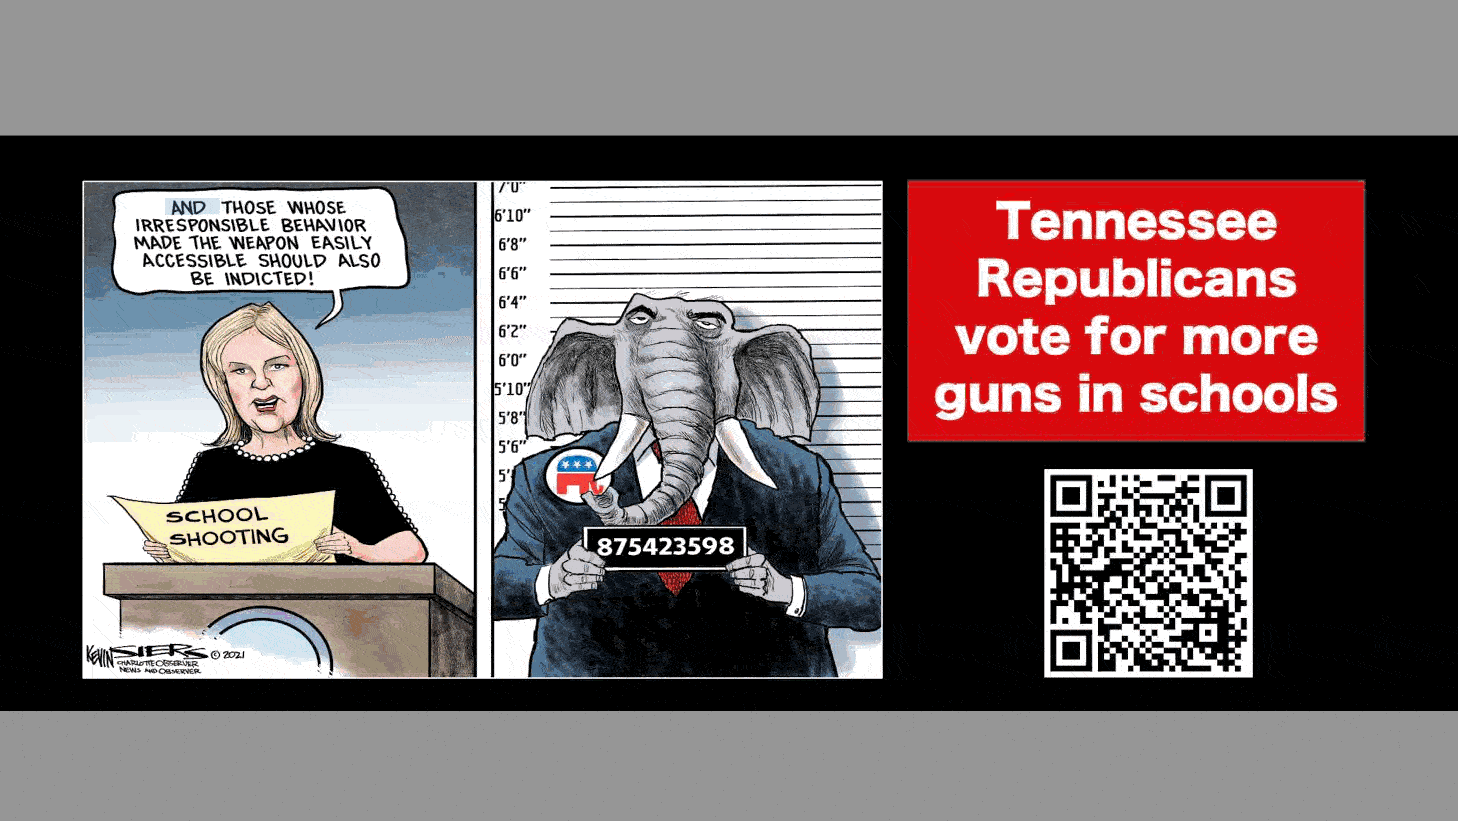 Tennessee Republicans vote for more guns in schools